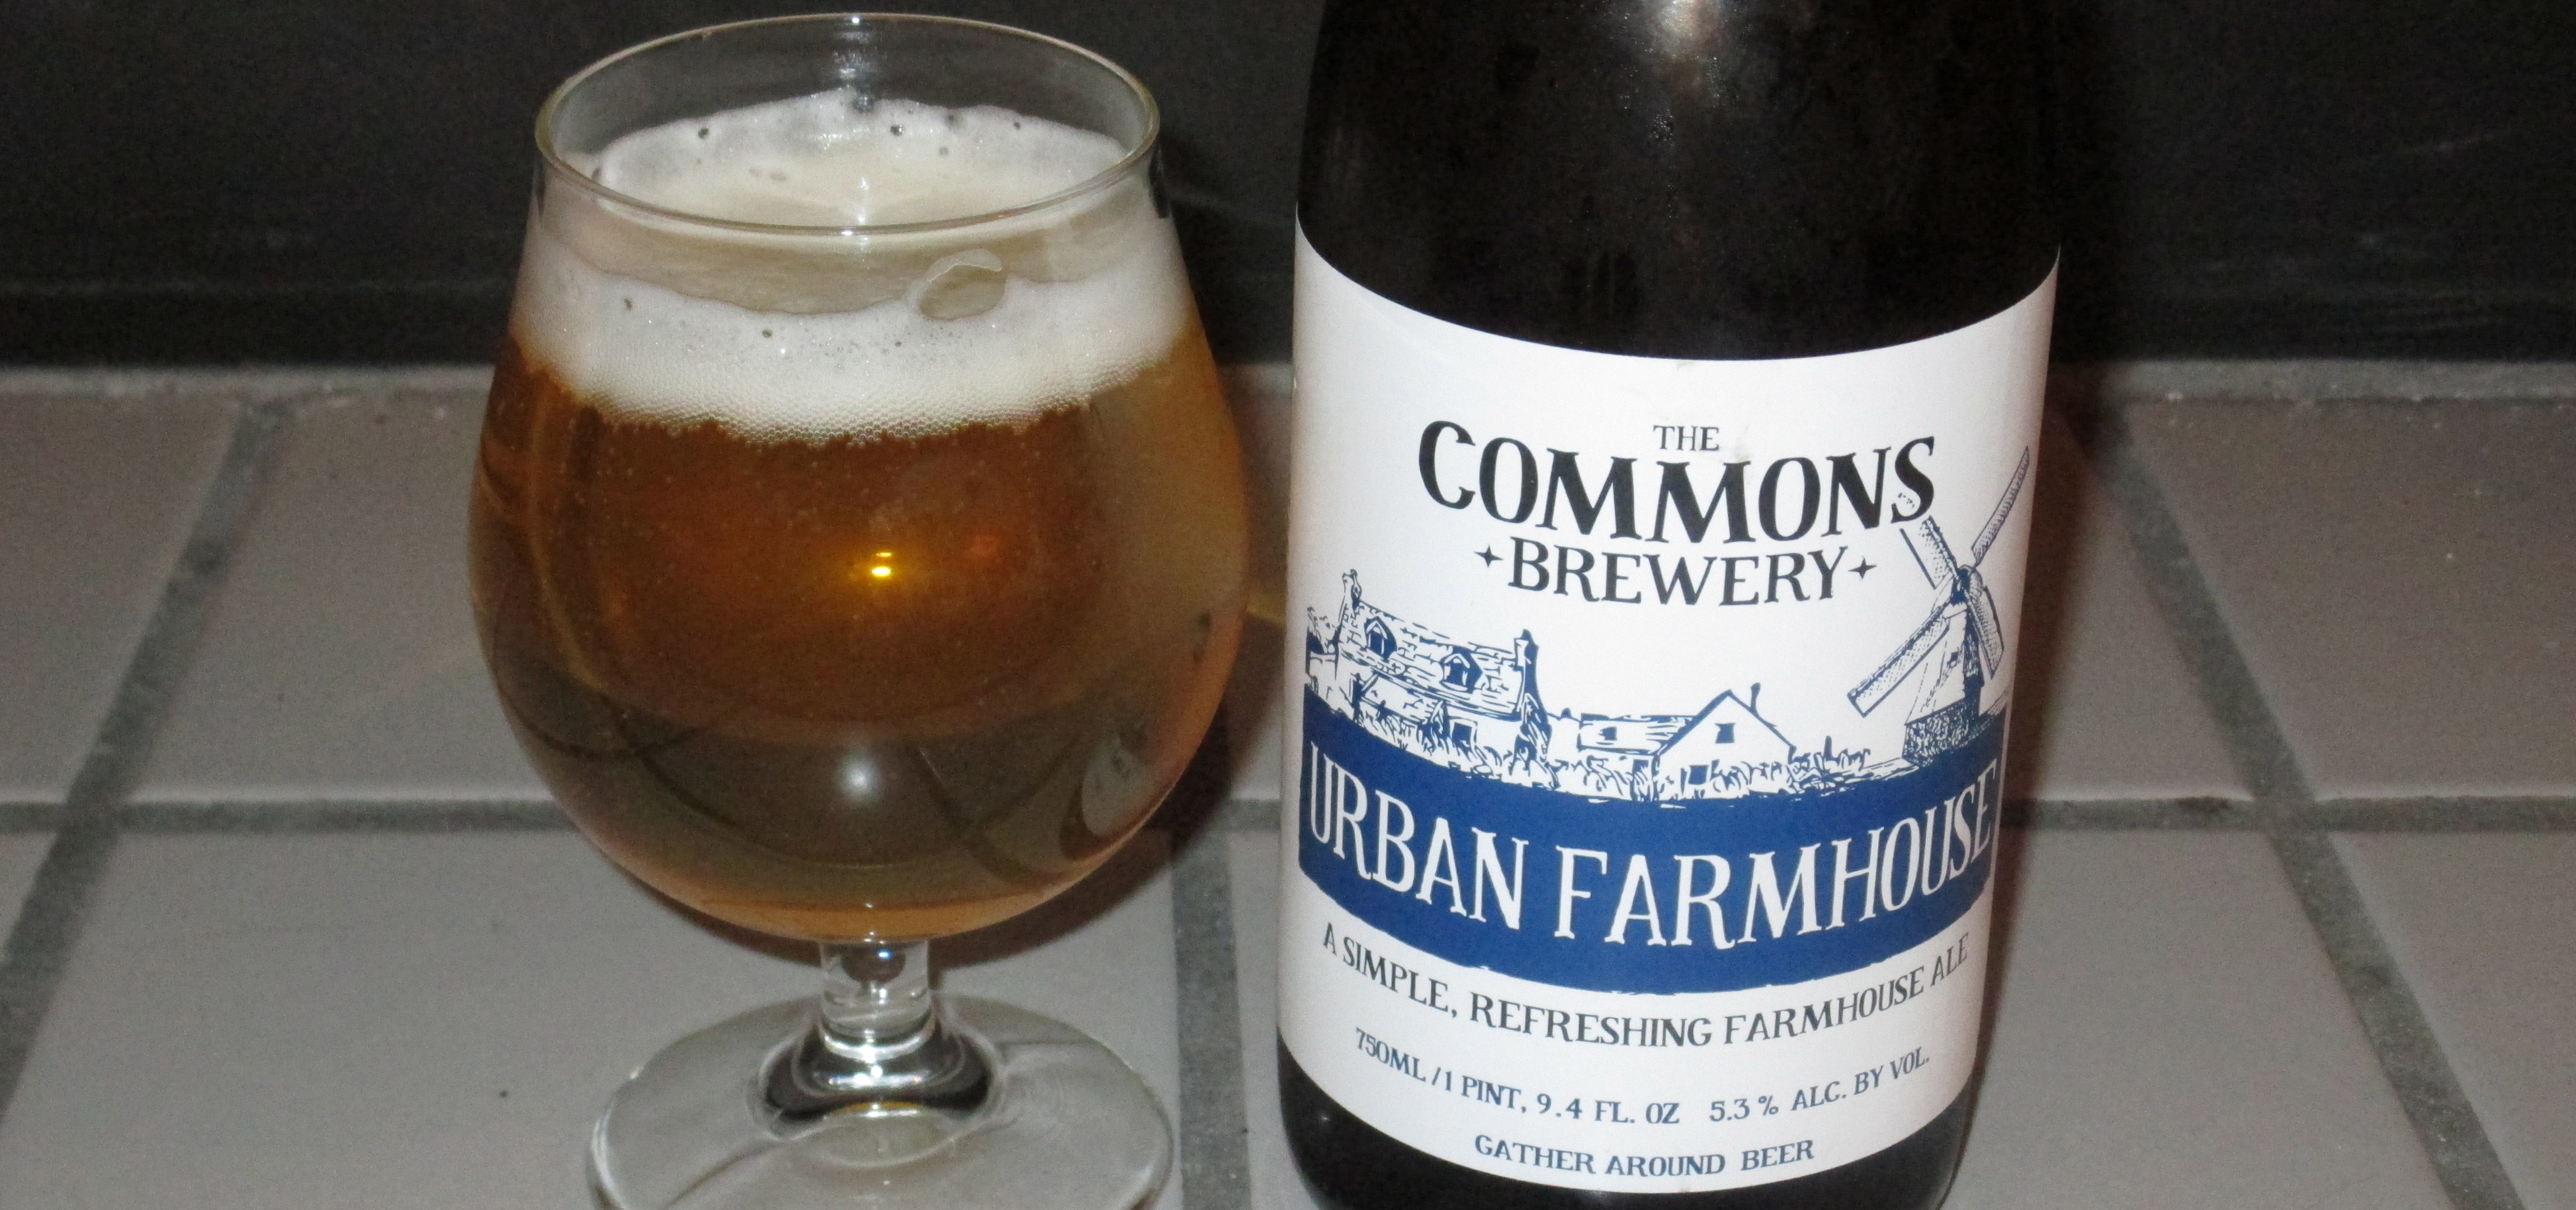 The Commons Brewery | Urban Farmhouse Ale